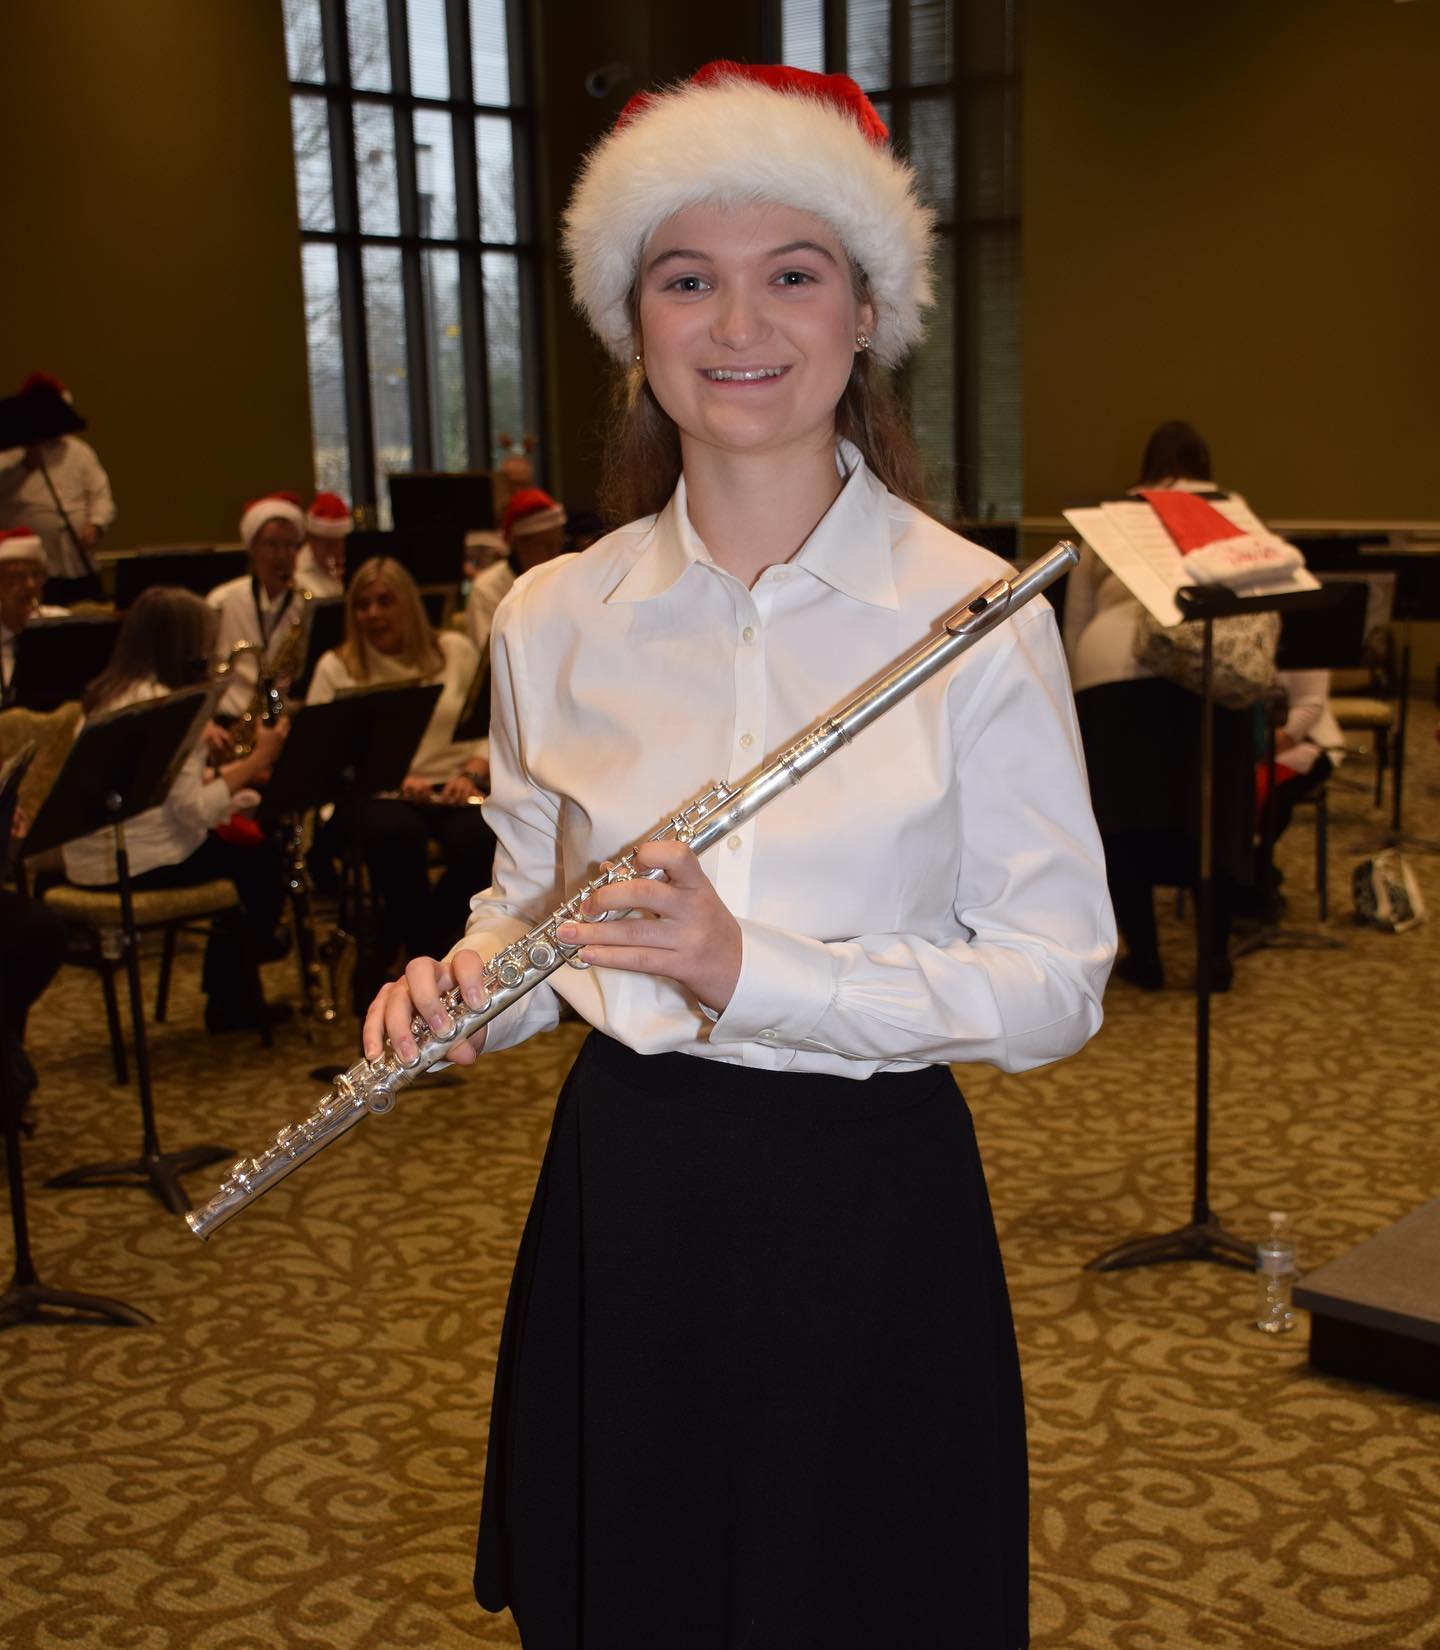 A few photo’s from Kate’s performance in Williamson County Community Band’s Christmas Concert this past Saturday. This group has been such a blessing to her. I’ll post a video separately from the show, and I’ve already posted all 14 pieces on my FB page.